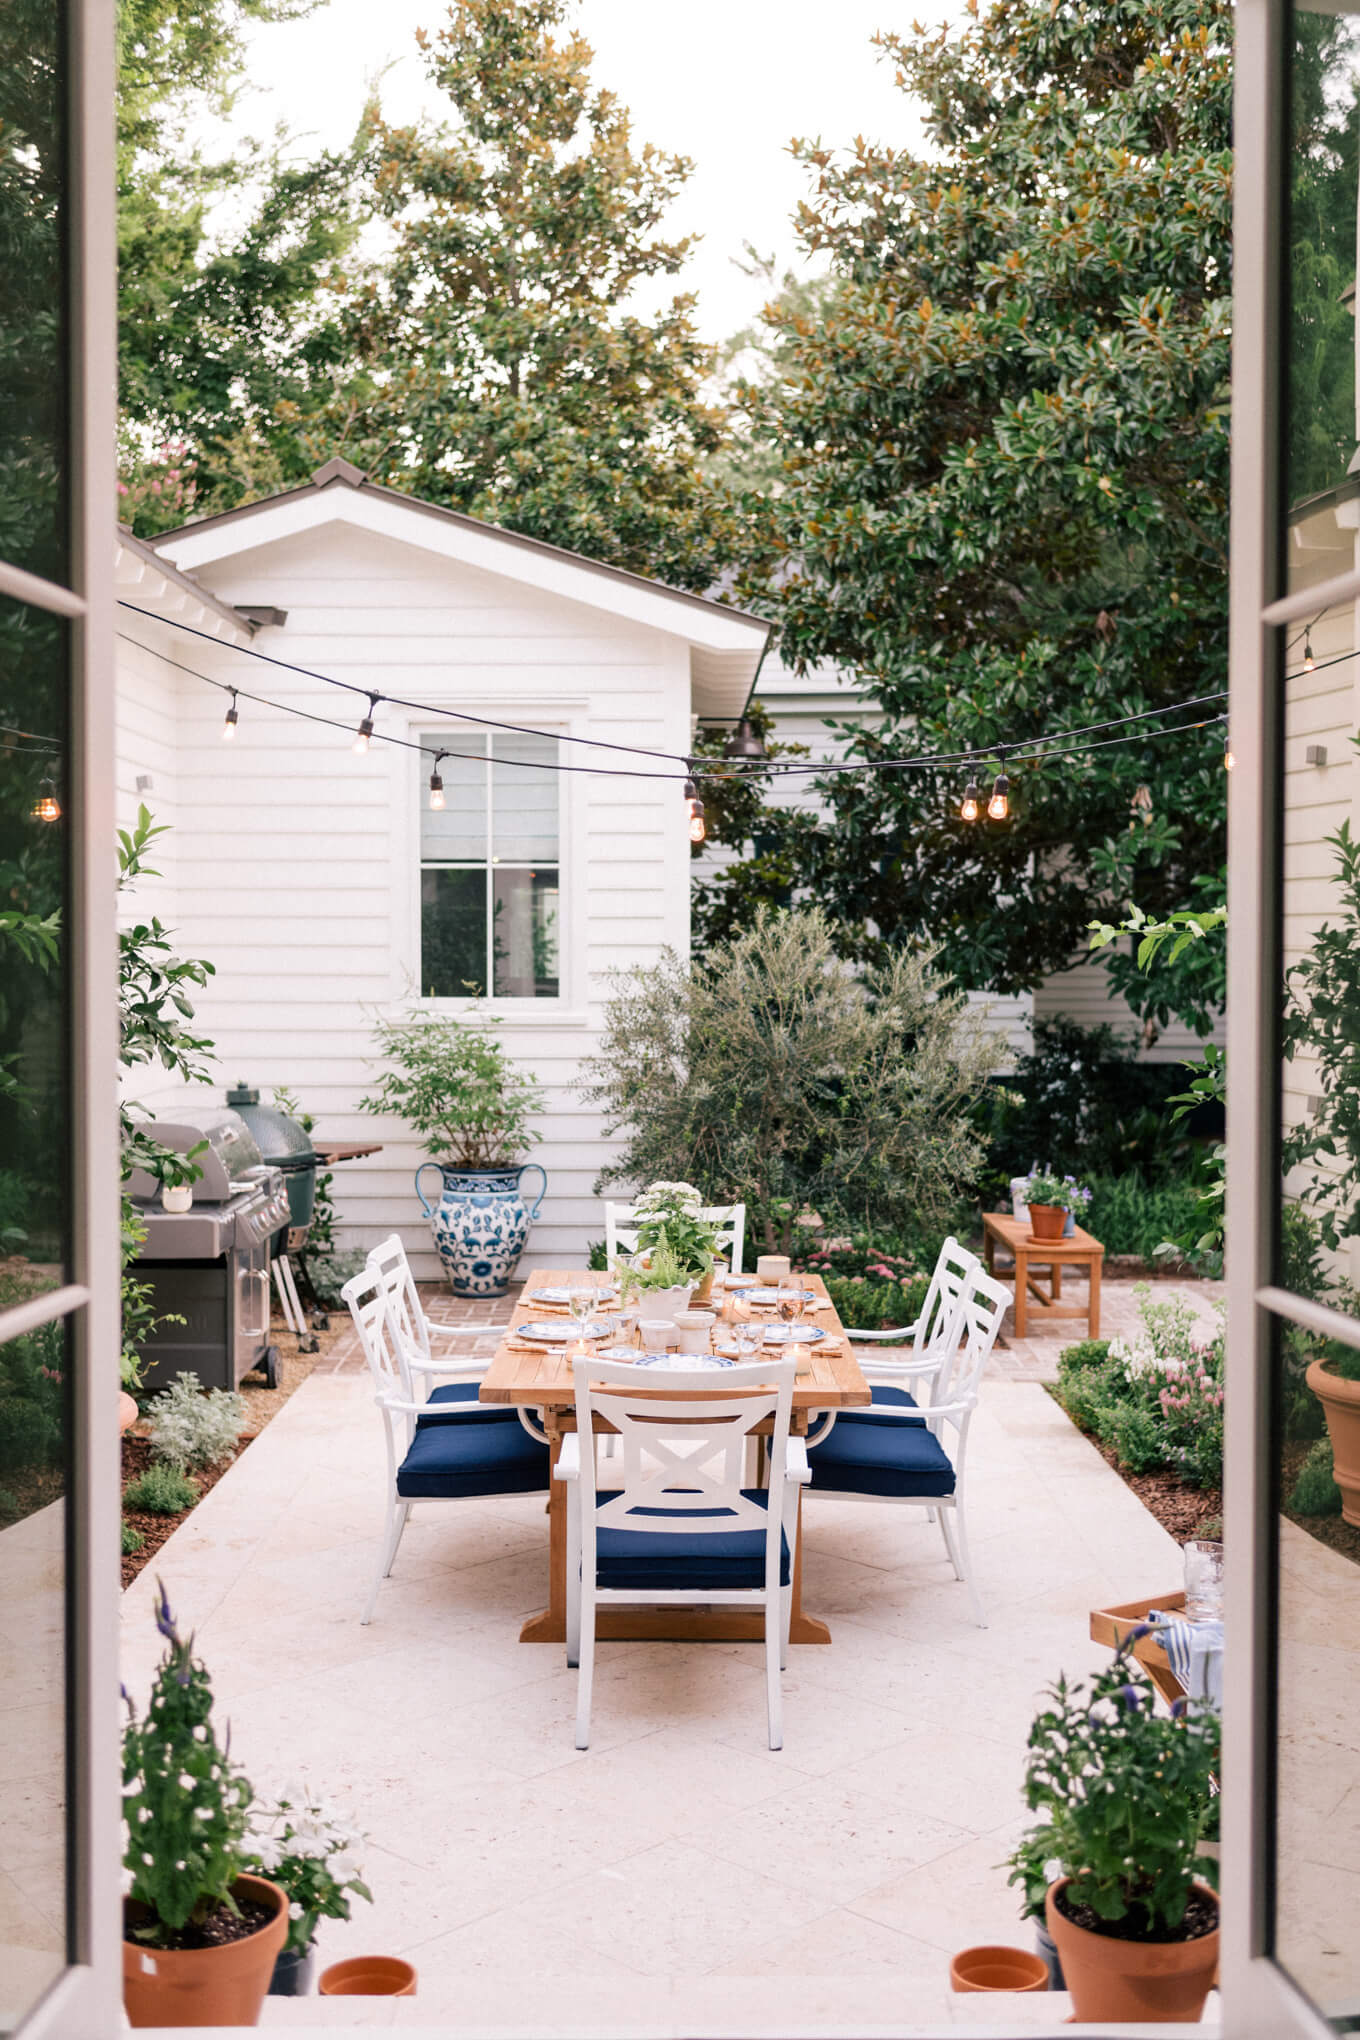 Create a layout for your backyard